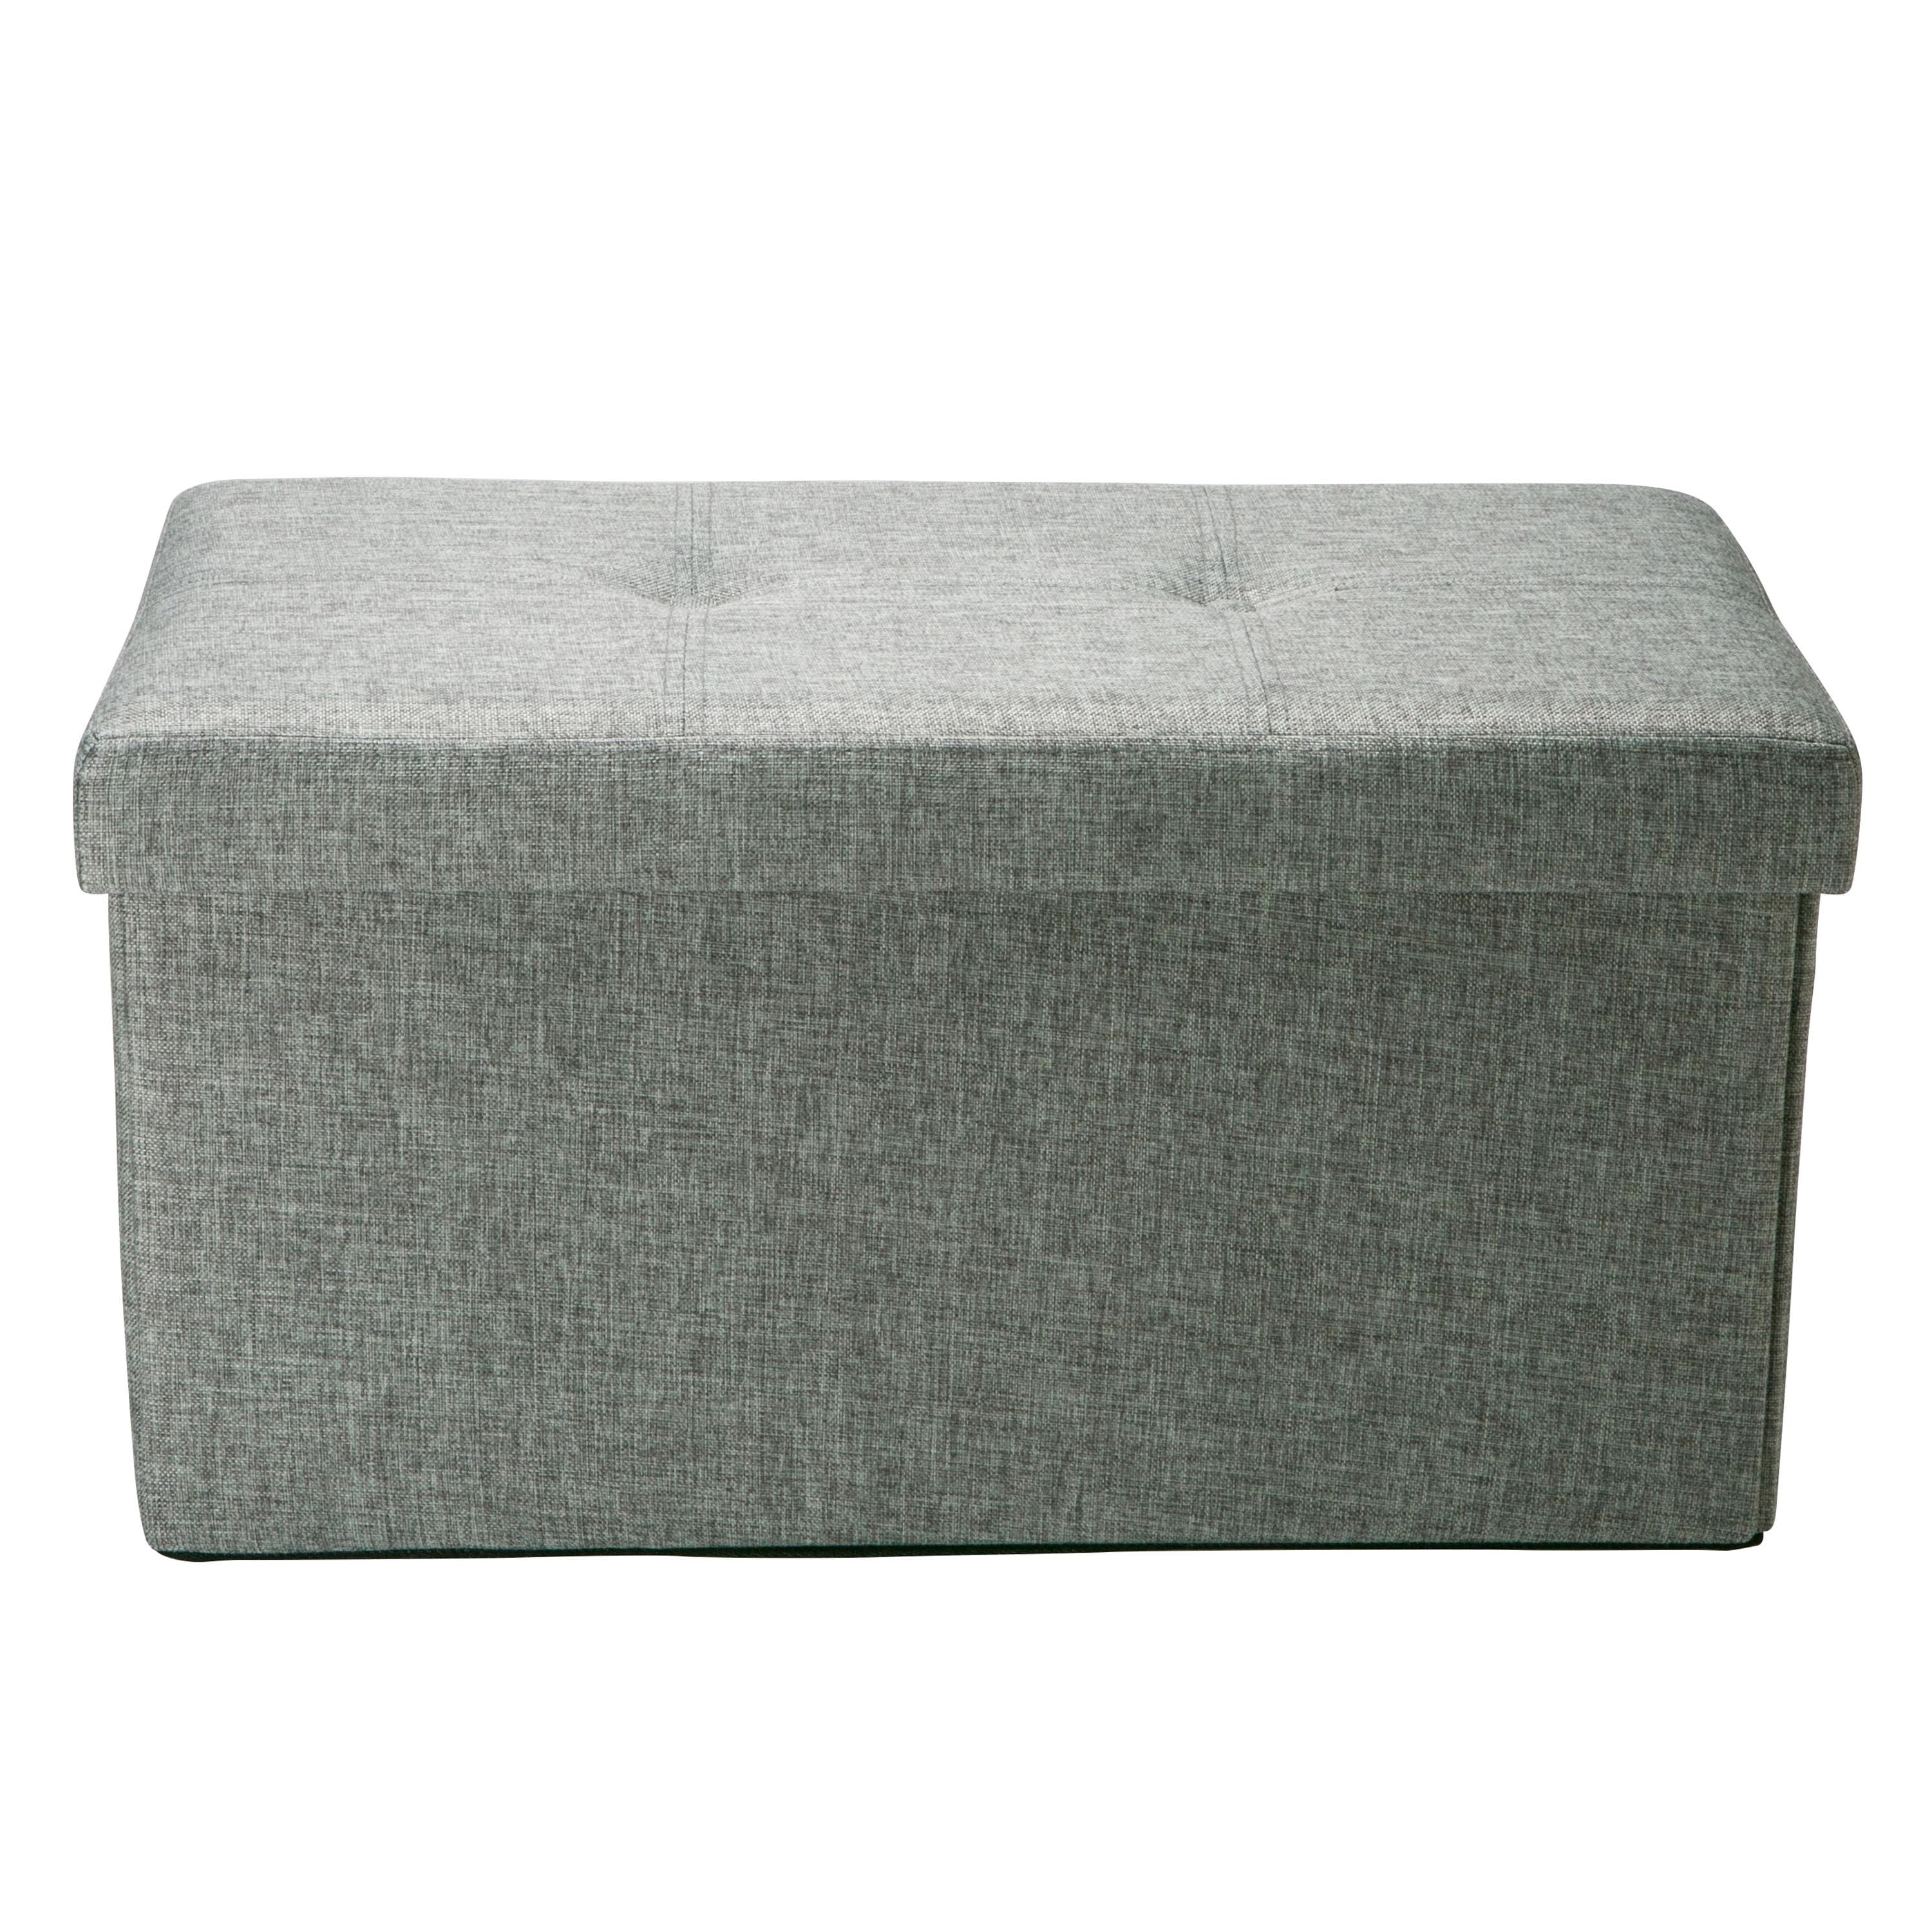 Dormify Hope Collapsible Storage Ottoman Chair - Grey